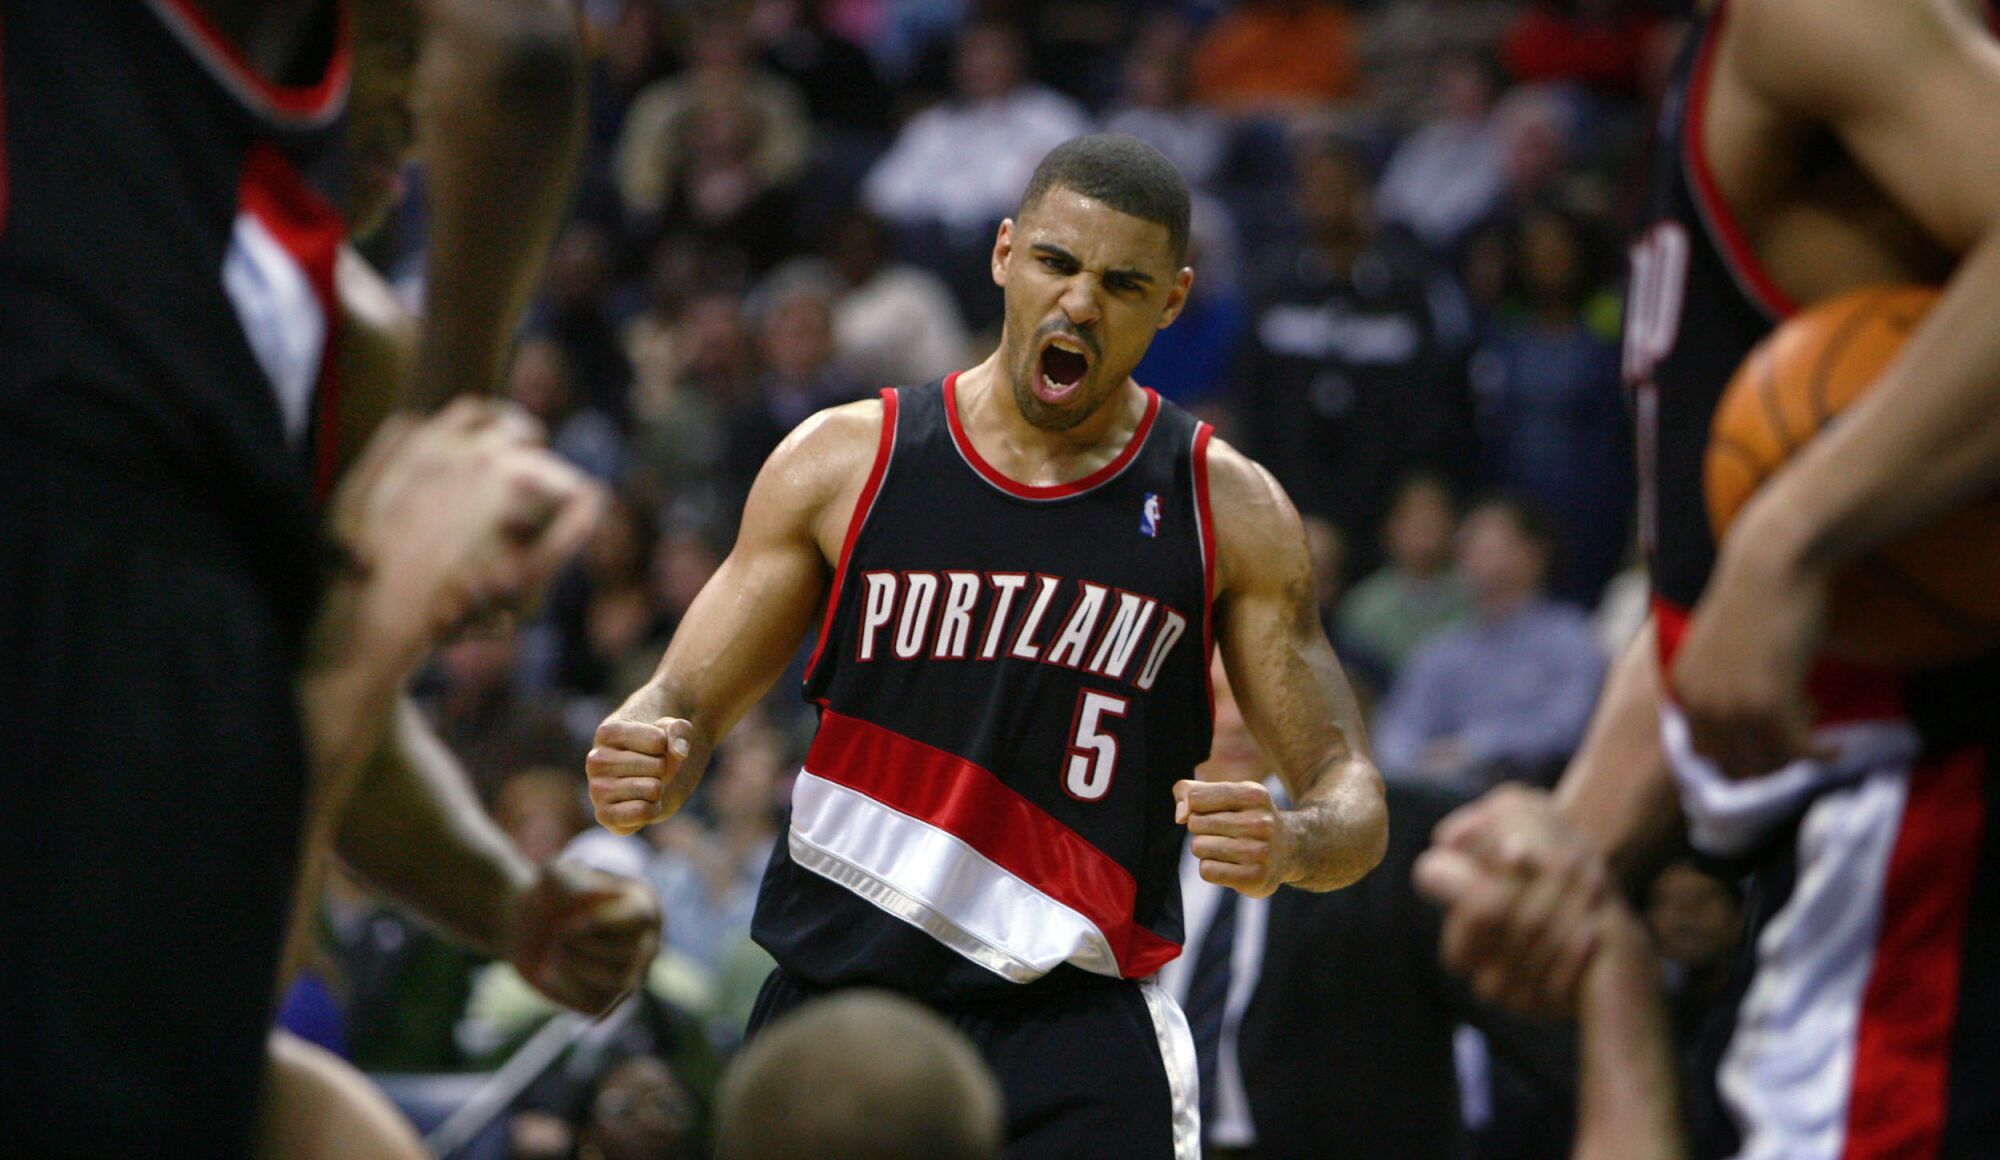 Ime Udoka (5) celebrates after the Trail Blazers scored in the second overtime against the Grizzlies on Jan. 27, 2007.